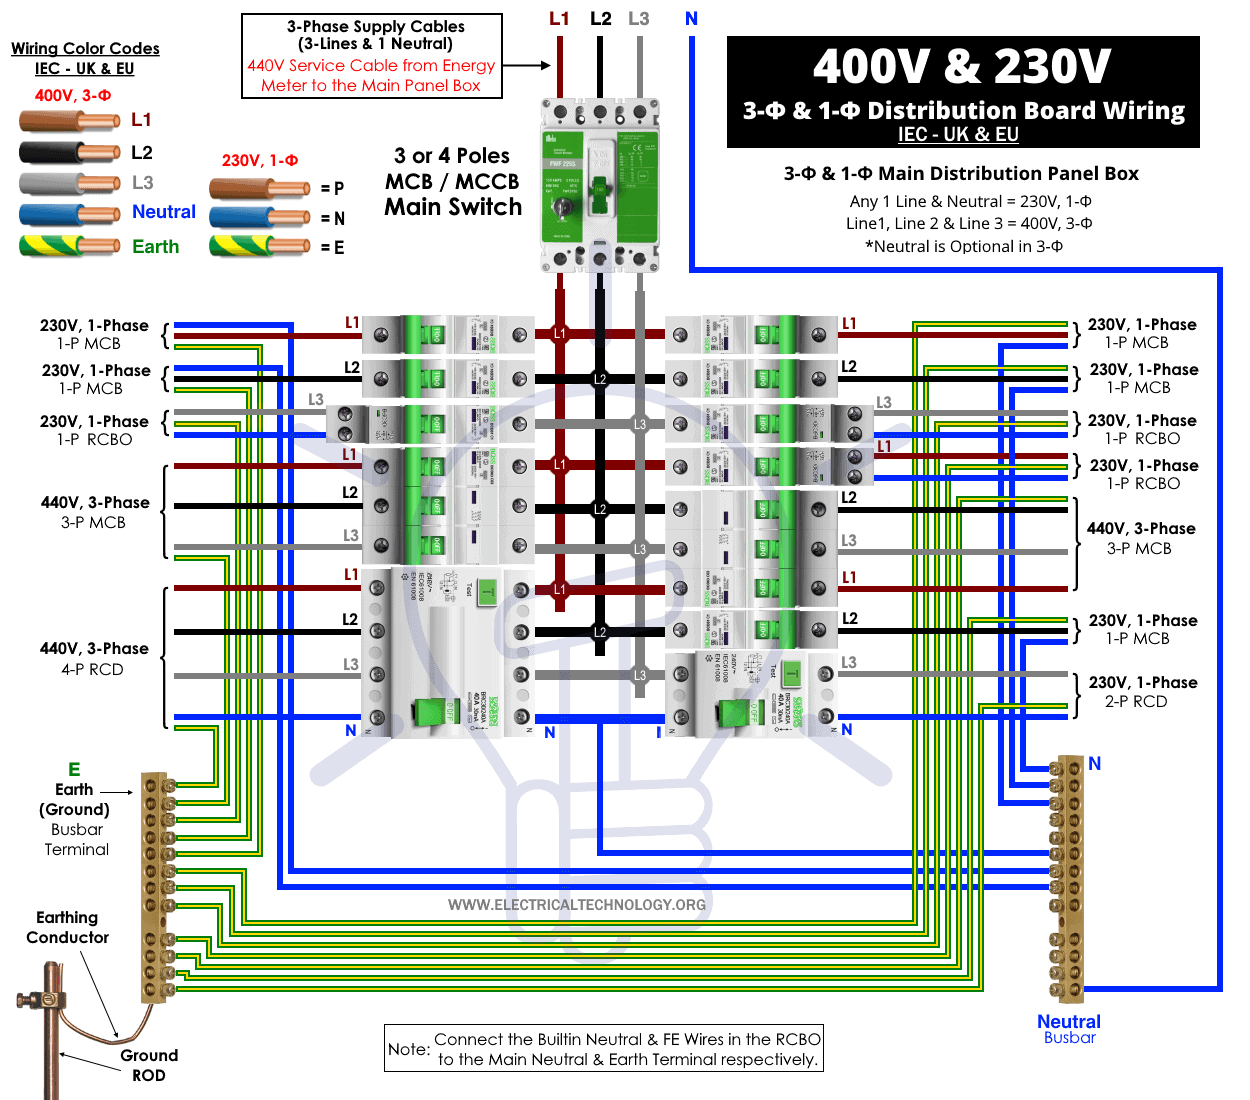 How to Wire Combo of 3-Phase & Single-Phase, 400V-230V Distribution Board